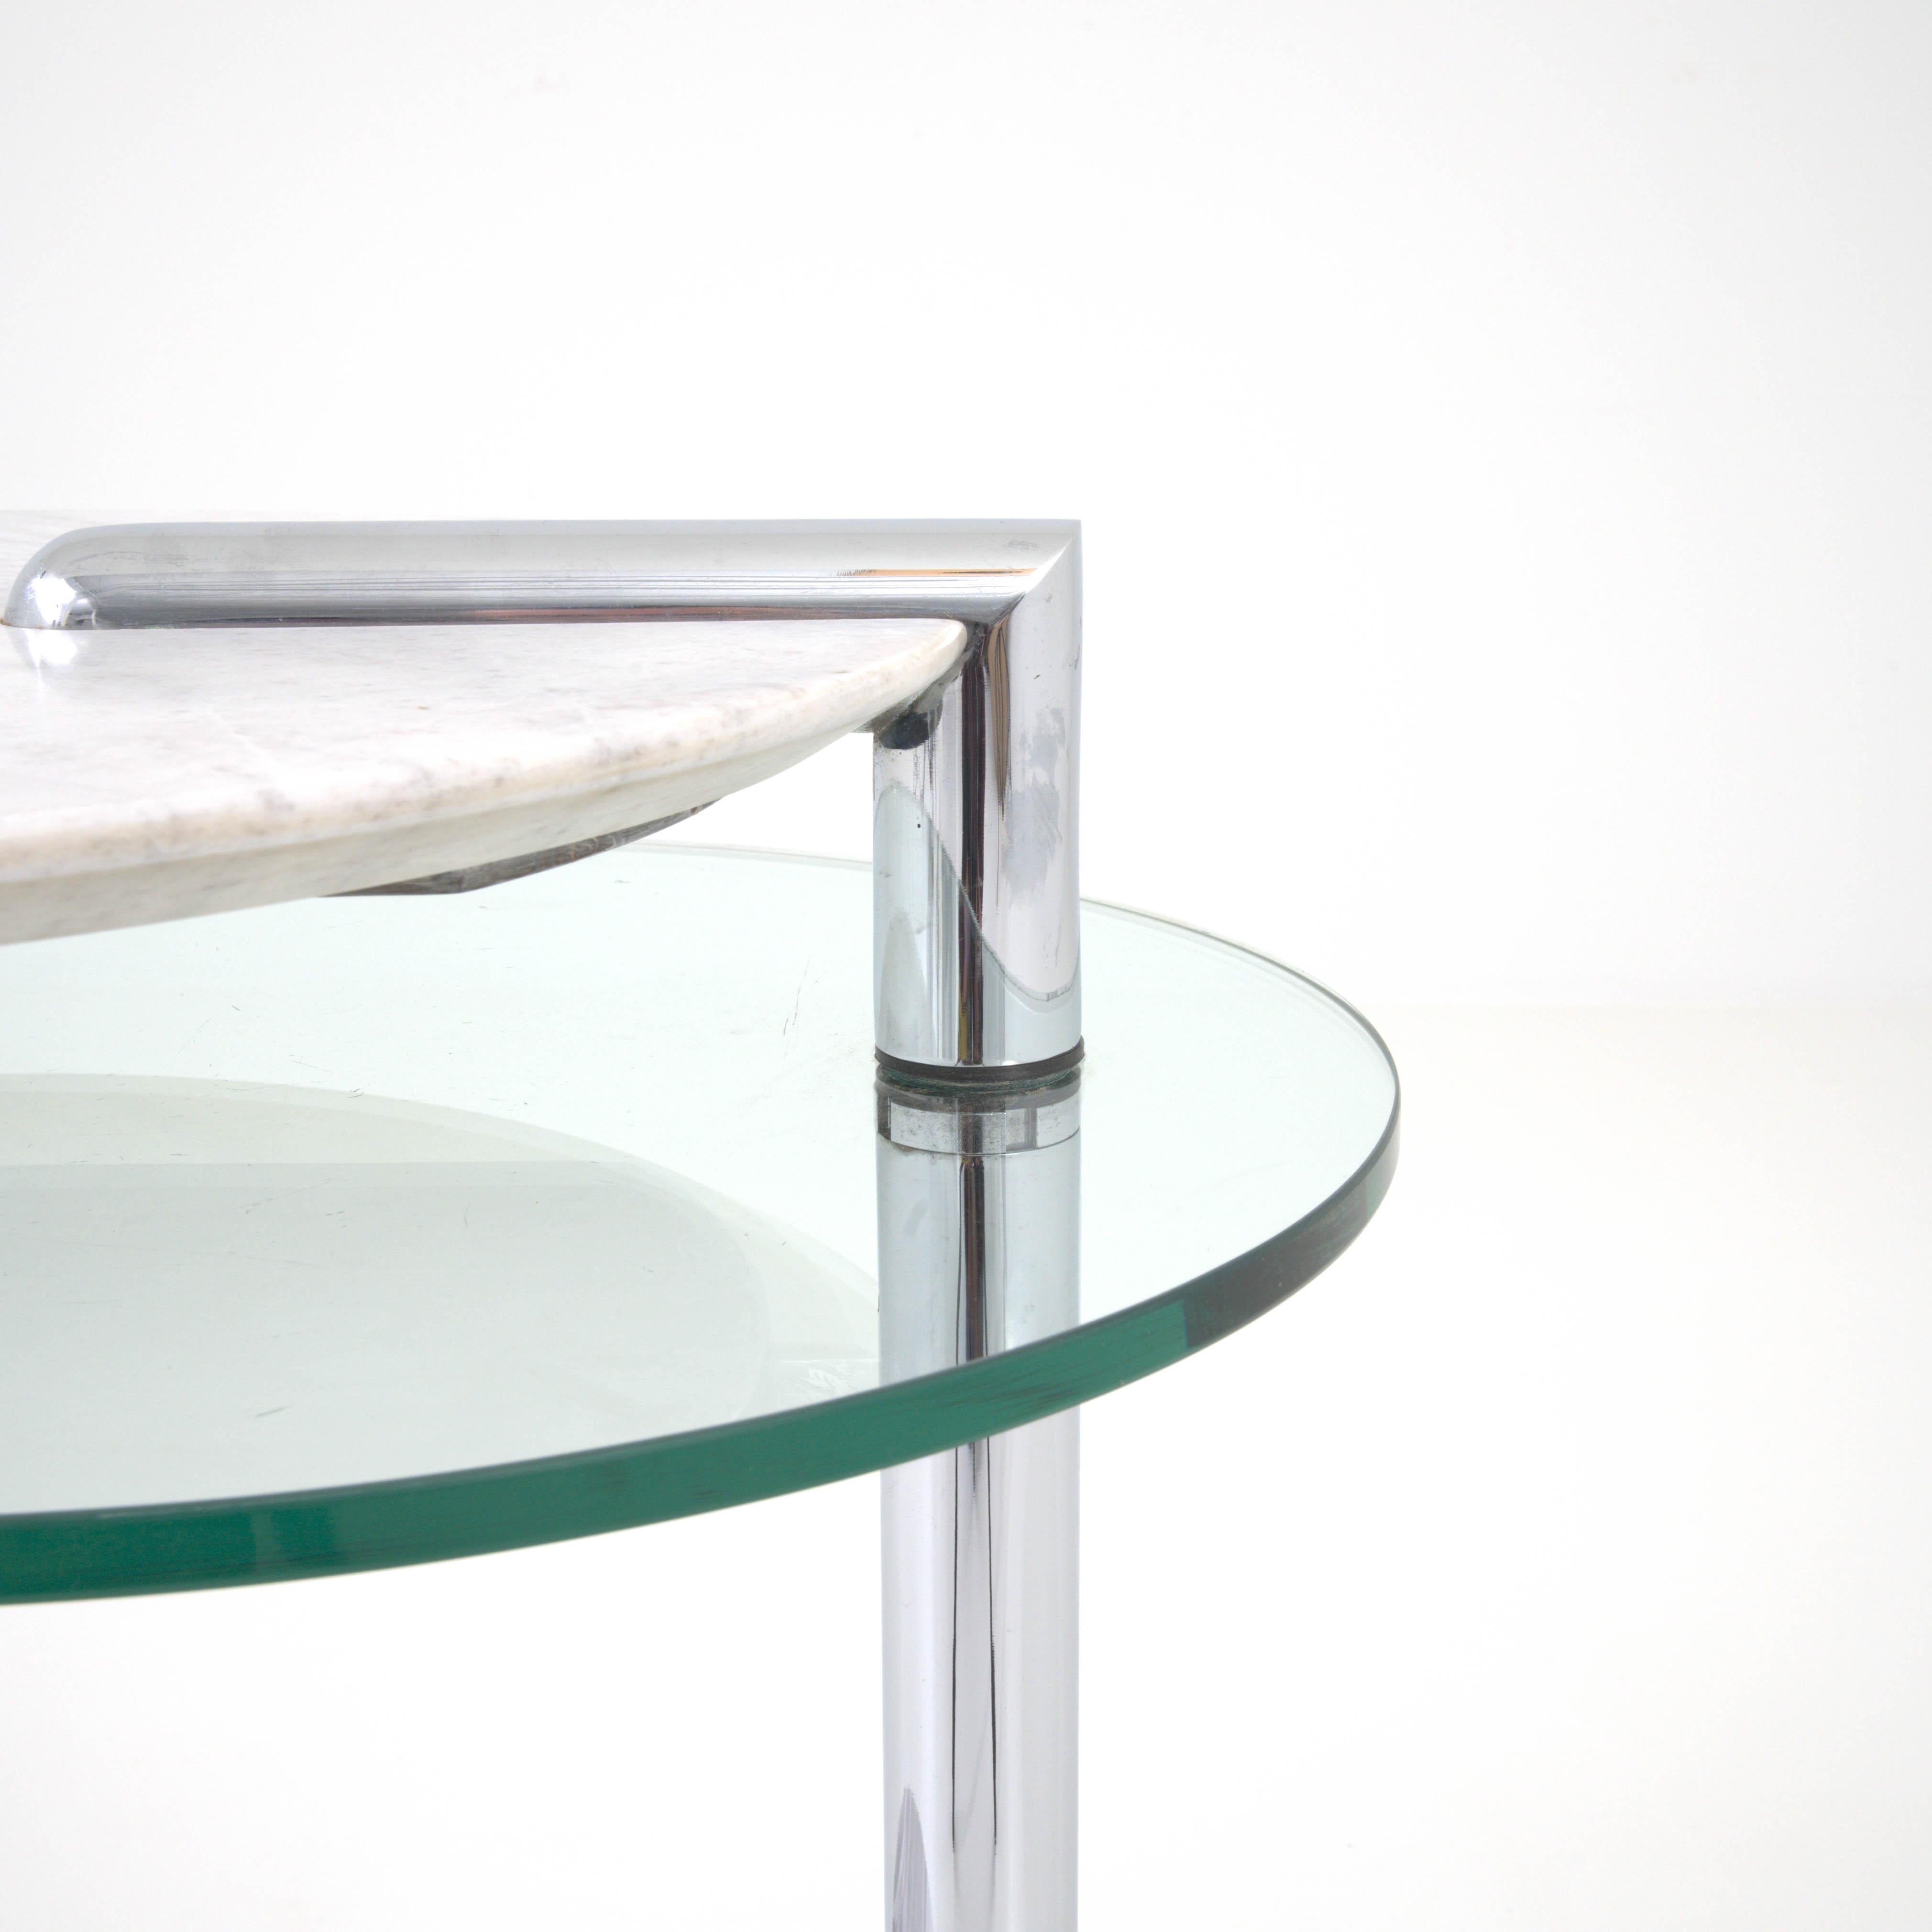 20th Century German Marble & Glass Coffee Table By Rolf Benz 8